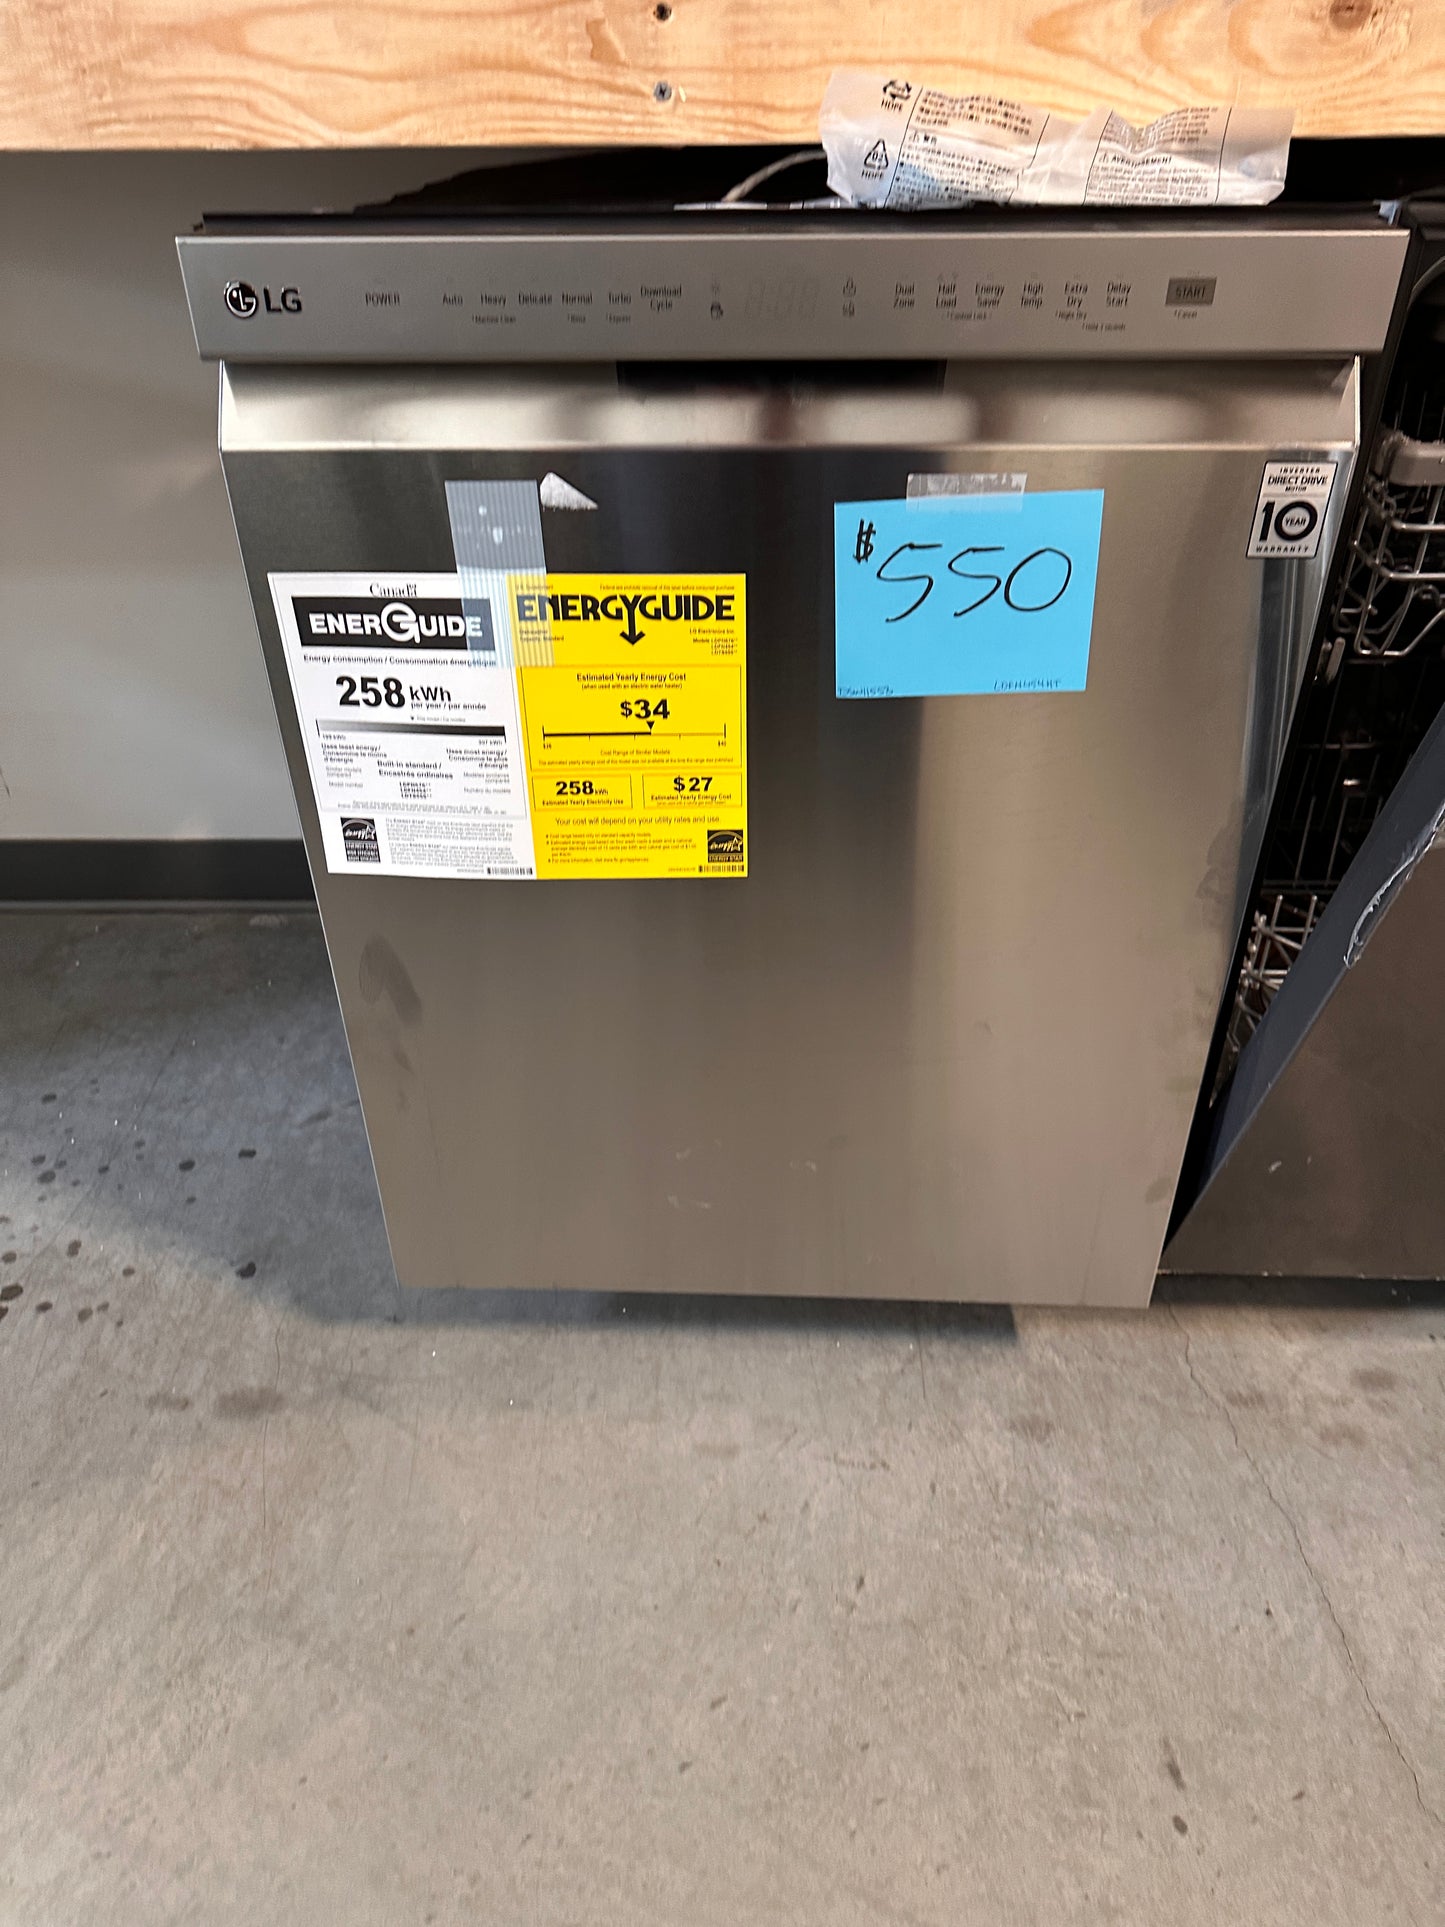 GREAT NEW FRONT CONTROL DISHWASHER - DSW11553 - LDFN4542S